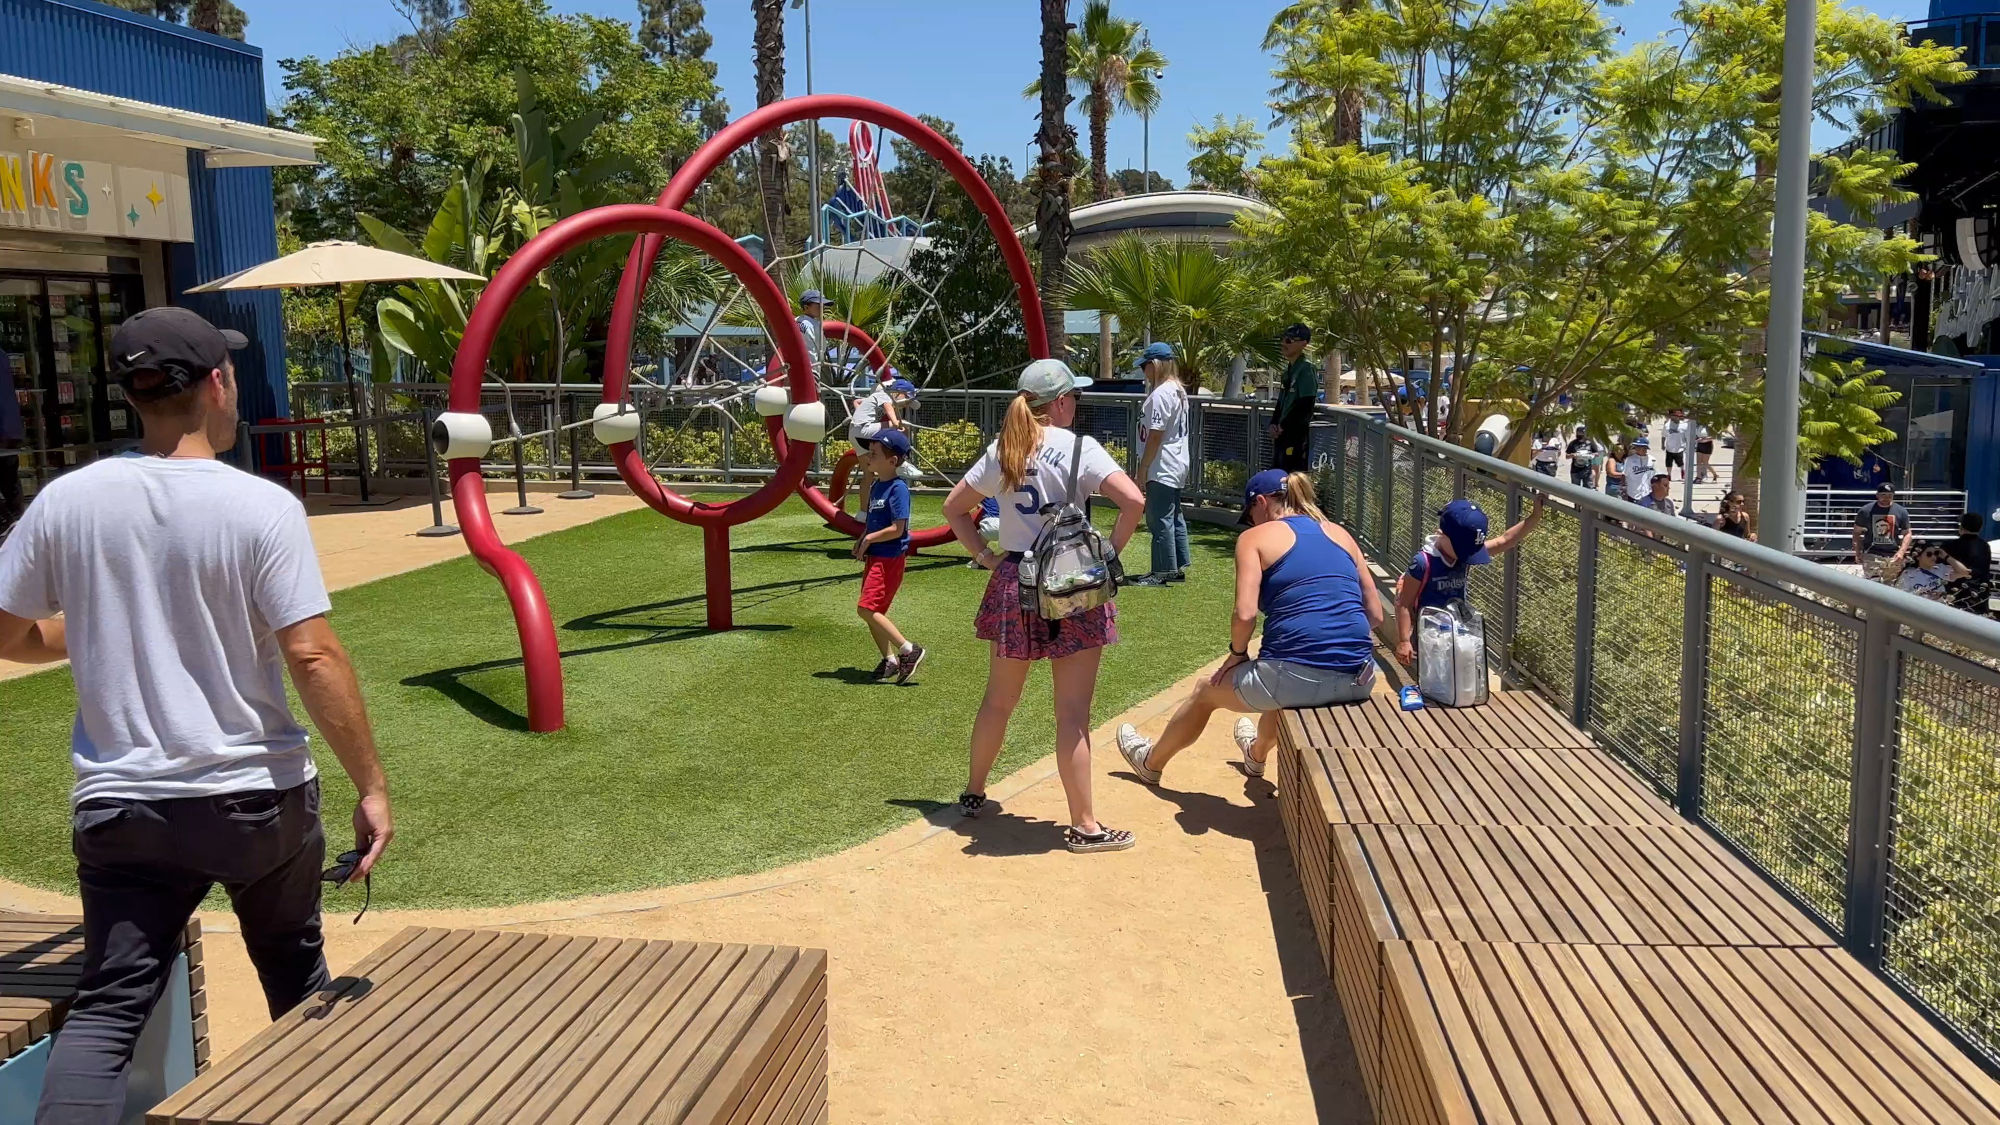 Kid's Play Areas Next to Drinks